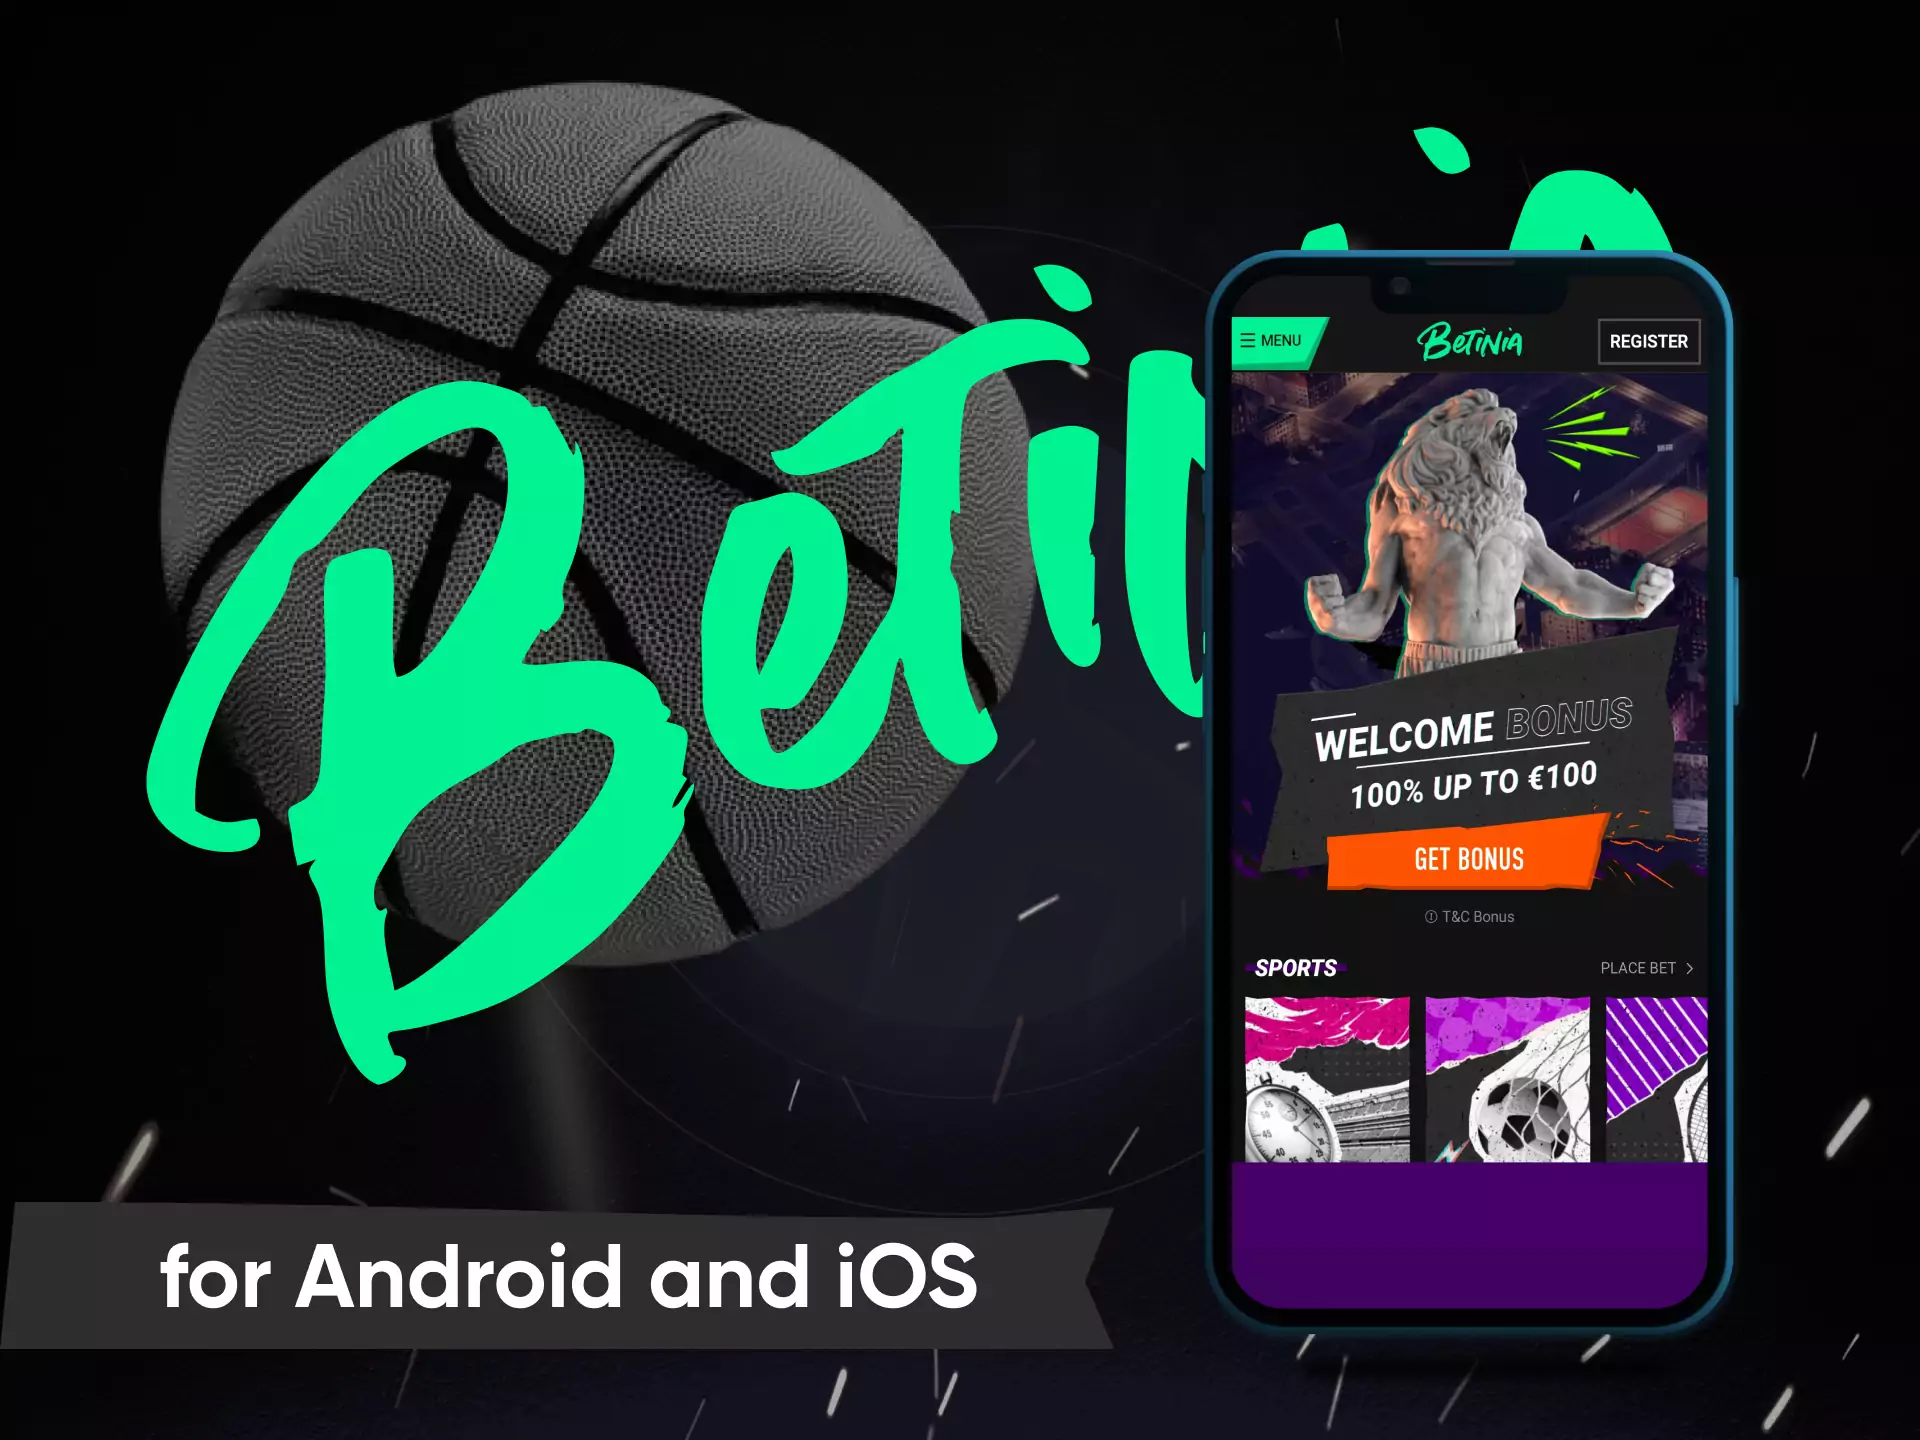 On Android and iOS devices, place bets on Betinia from a mobile browser.